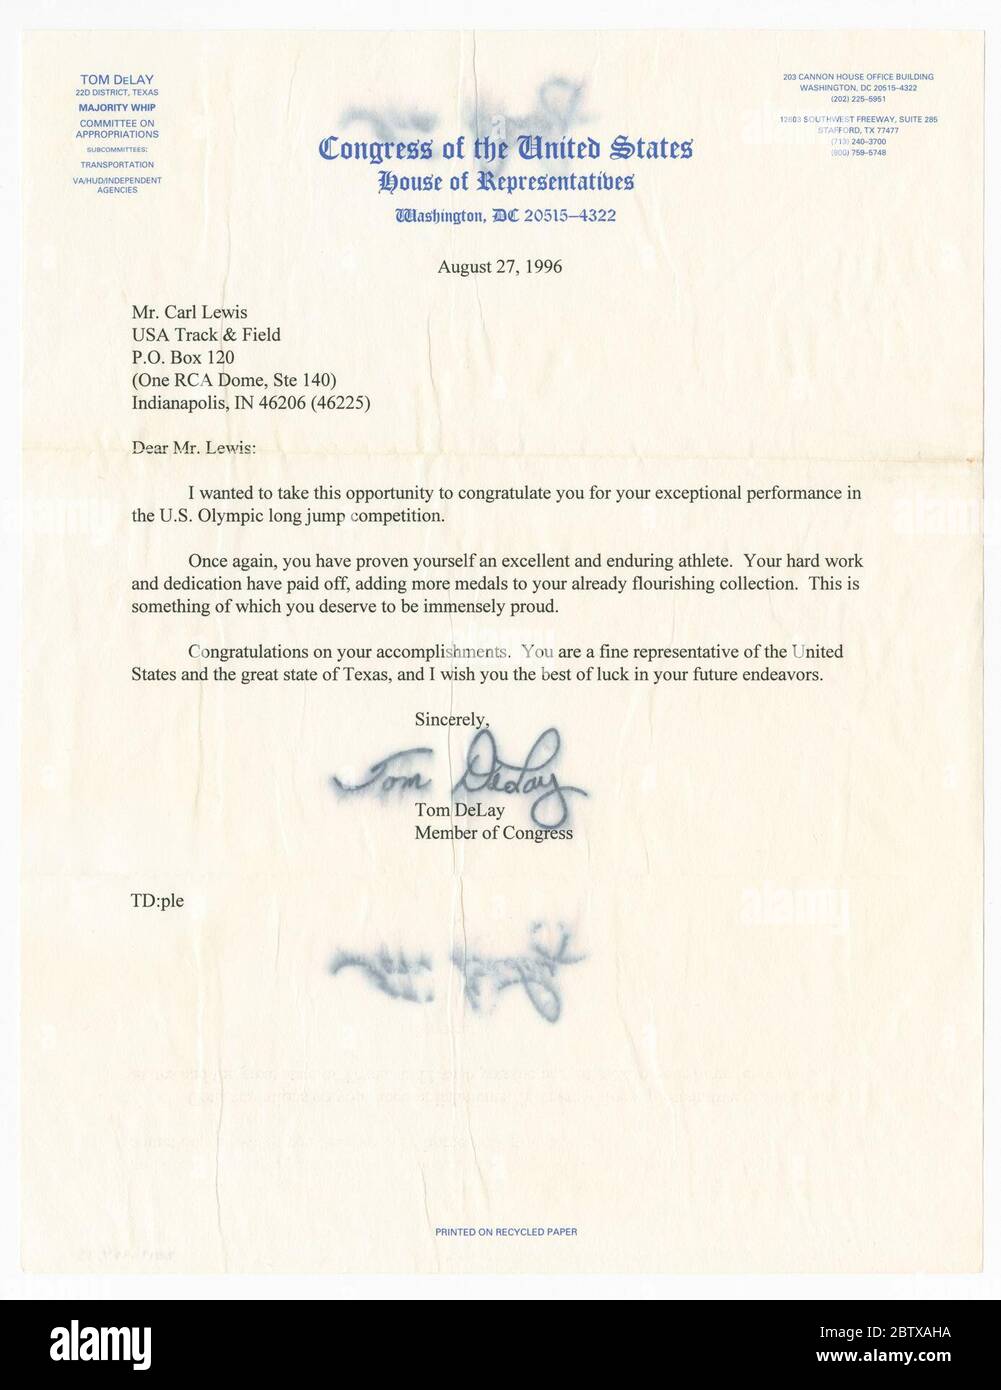 Letter from US Representative Tom DeLay to Carl Lewis. Typed letter from Tom DeLay., Texas Congressman, to Carl Lewis, with DeLay's signature. Dated August 27, 1996. Blue U.S. House of Representatives letterhead at the top. The letter reads [August 27, 1996 / Mr. Carl Lewis / USA Track & Field / P.O. Box 120 / (One RCA Dome, Ste. Stock Photo